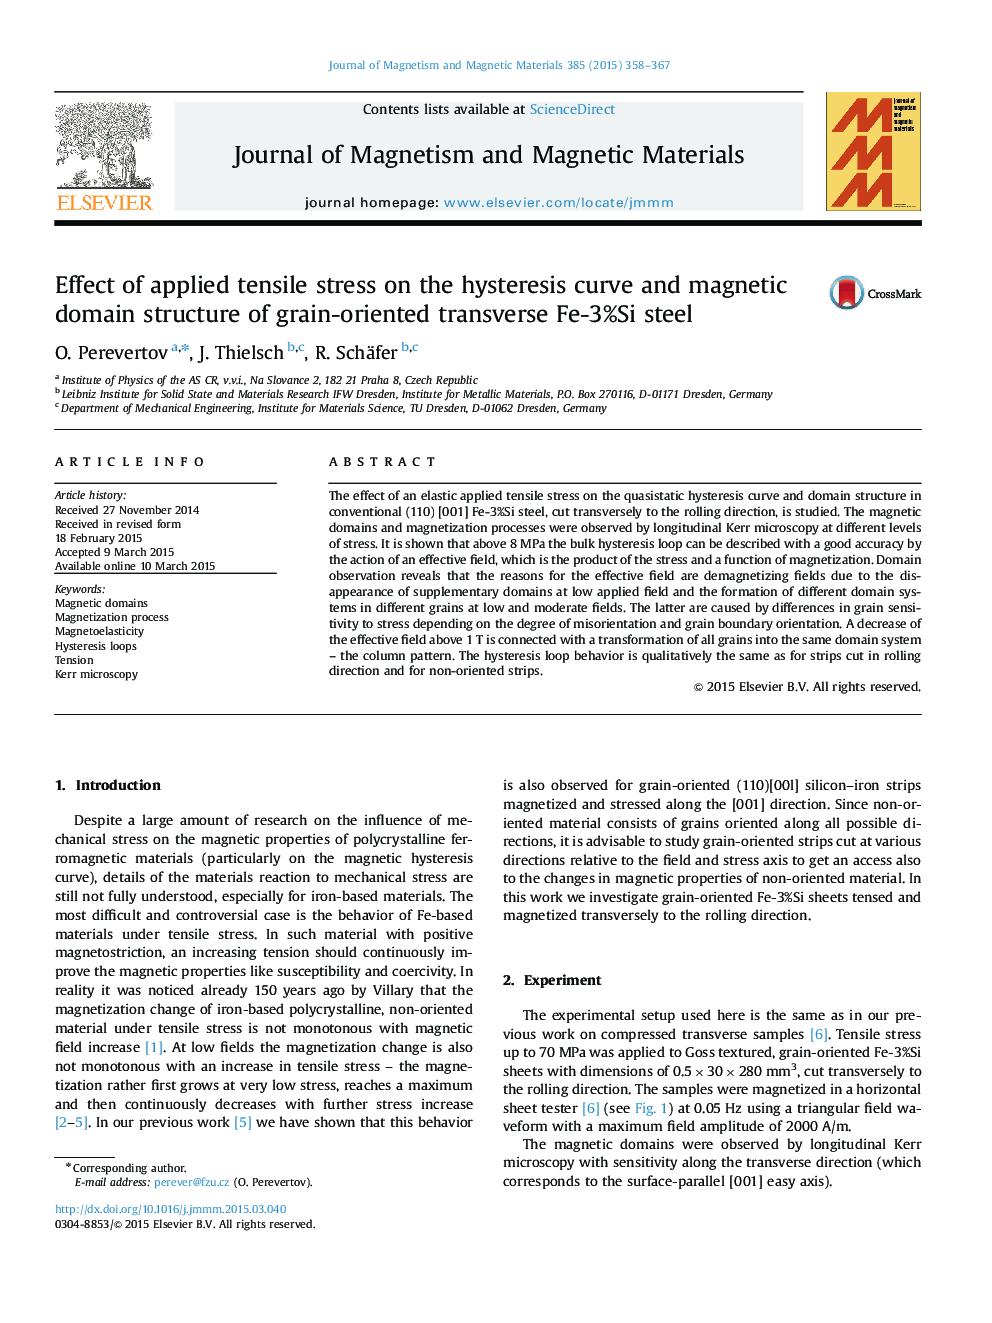 Effect of applied tensile stress on the hysteresis curve and magnetic domain structure of grain-oriented transverse Fe-3%Si steel